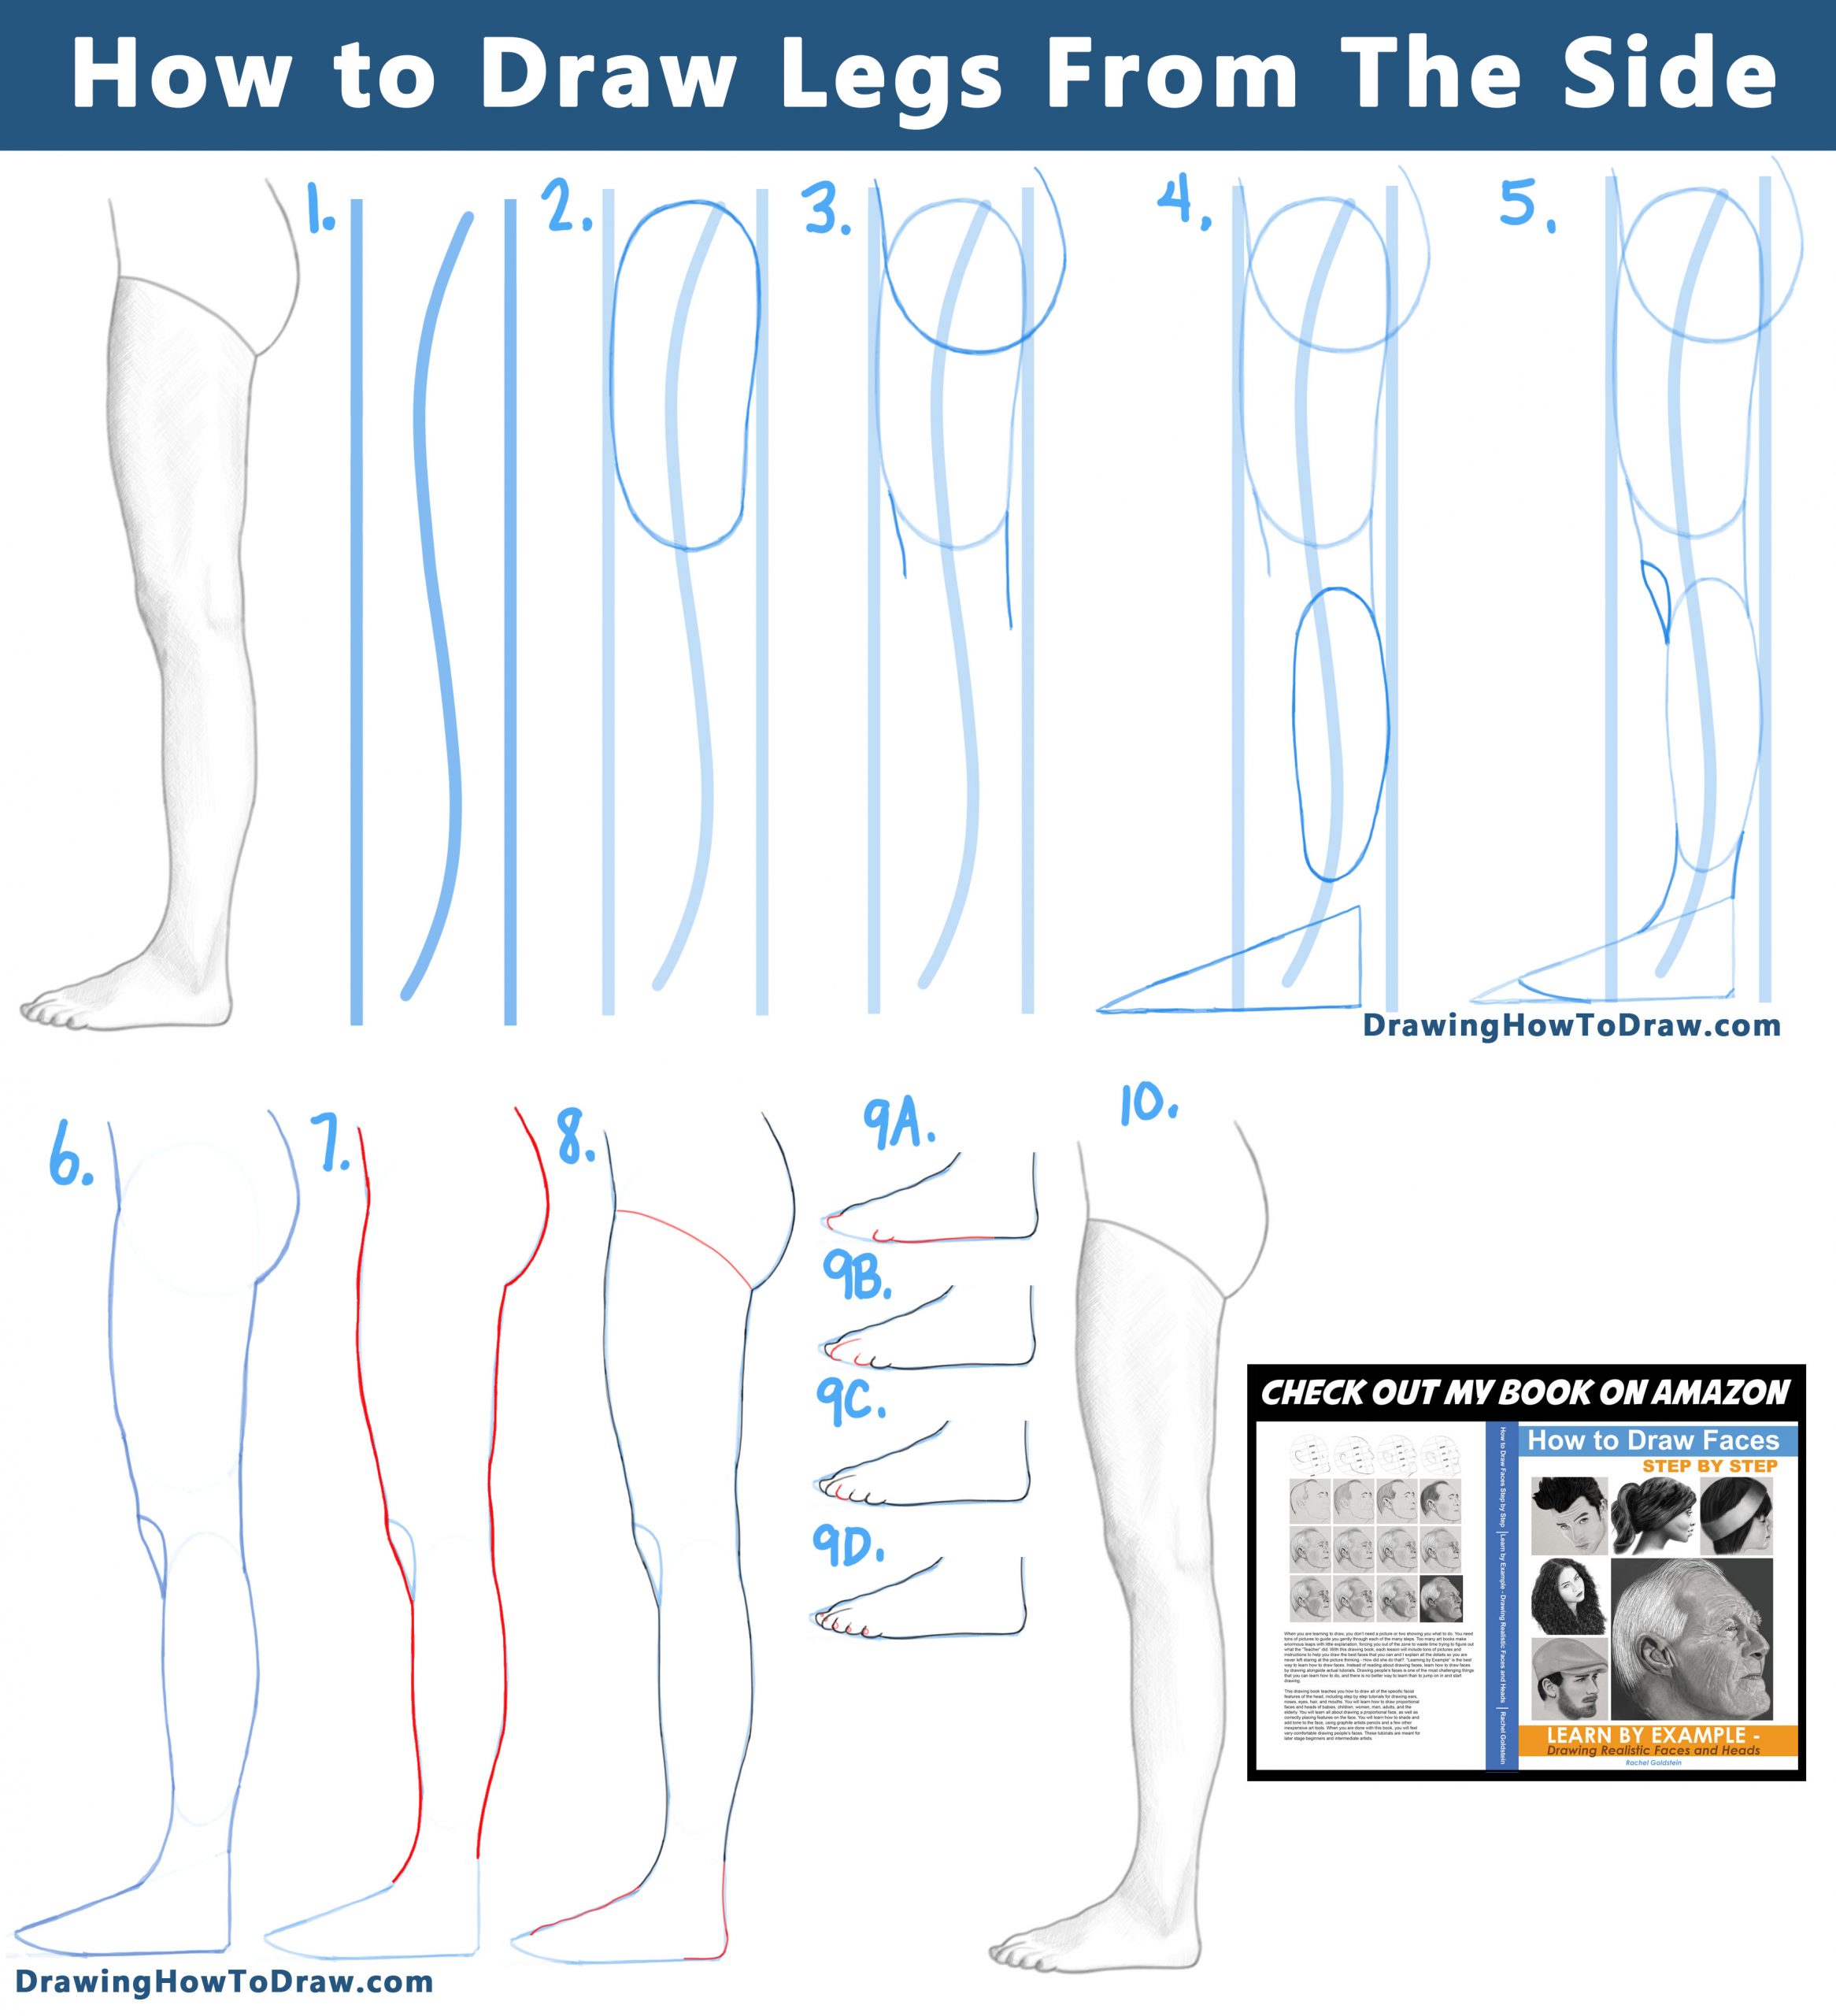 How to draw legs and feet from the side view - easy step by step drawing tutorial